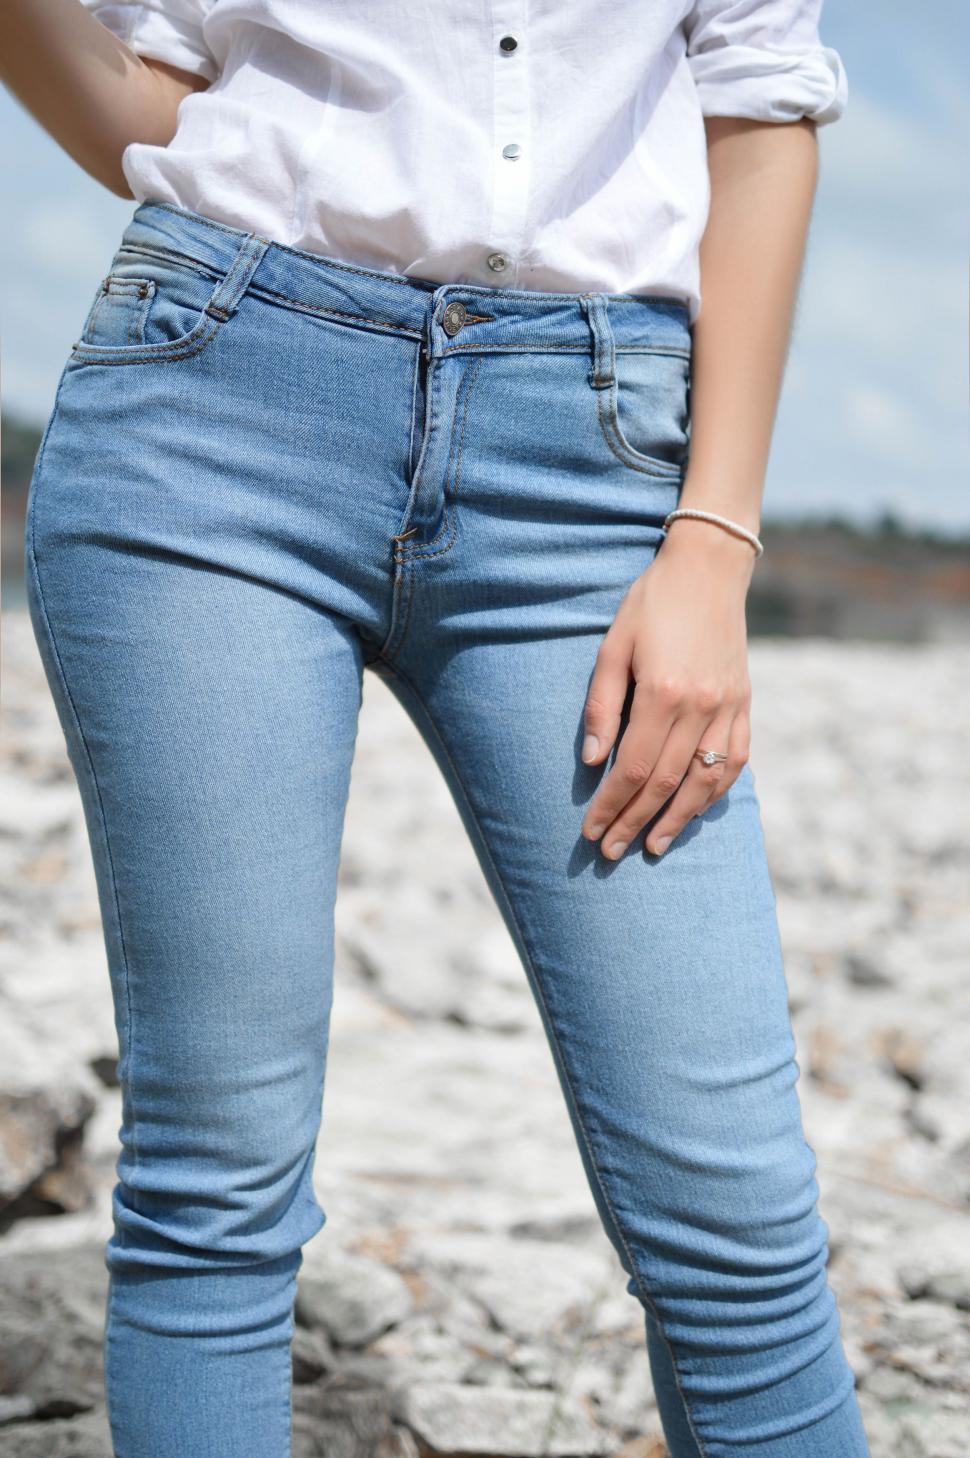 Free Image of Woman in White Shirt and Blue Jeans 